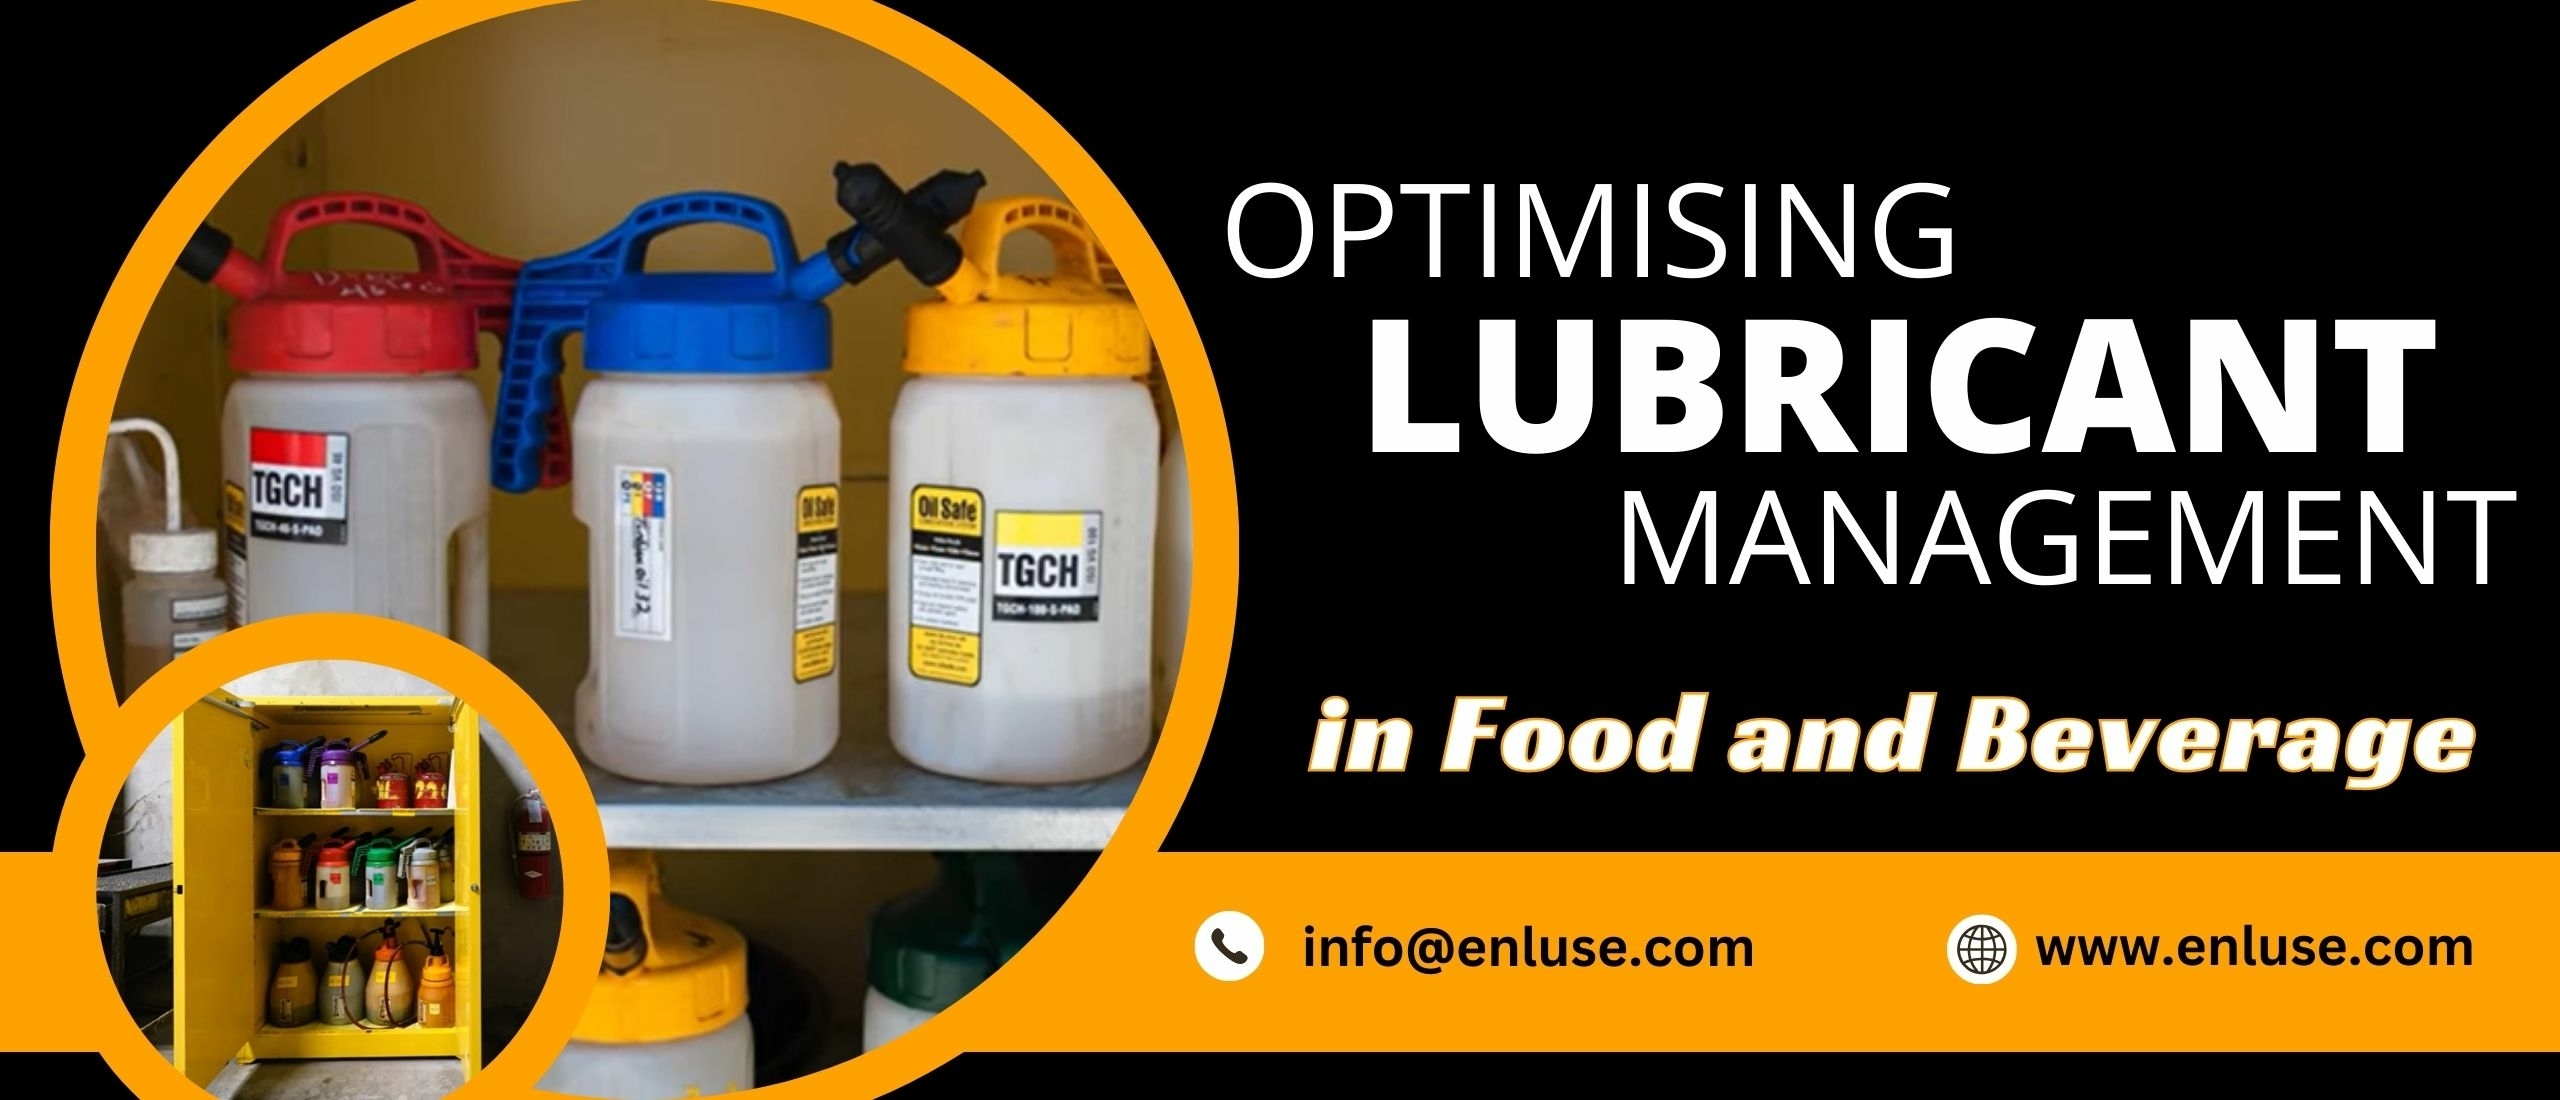 Optimising Lubricant Management in the food industry